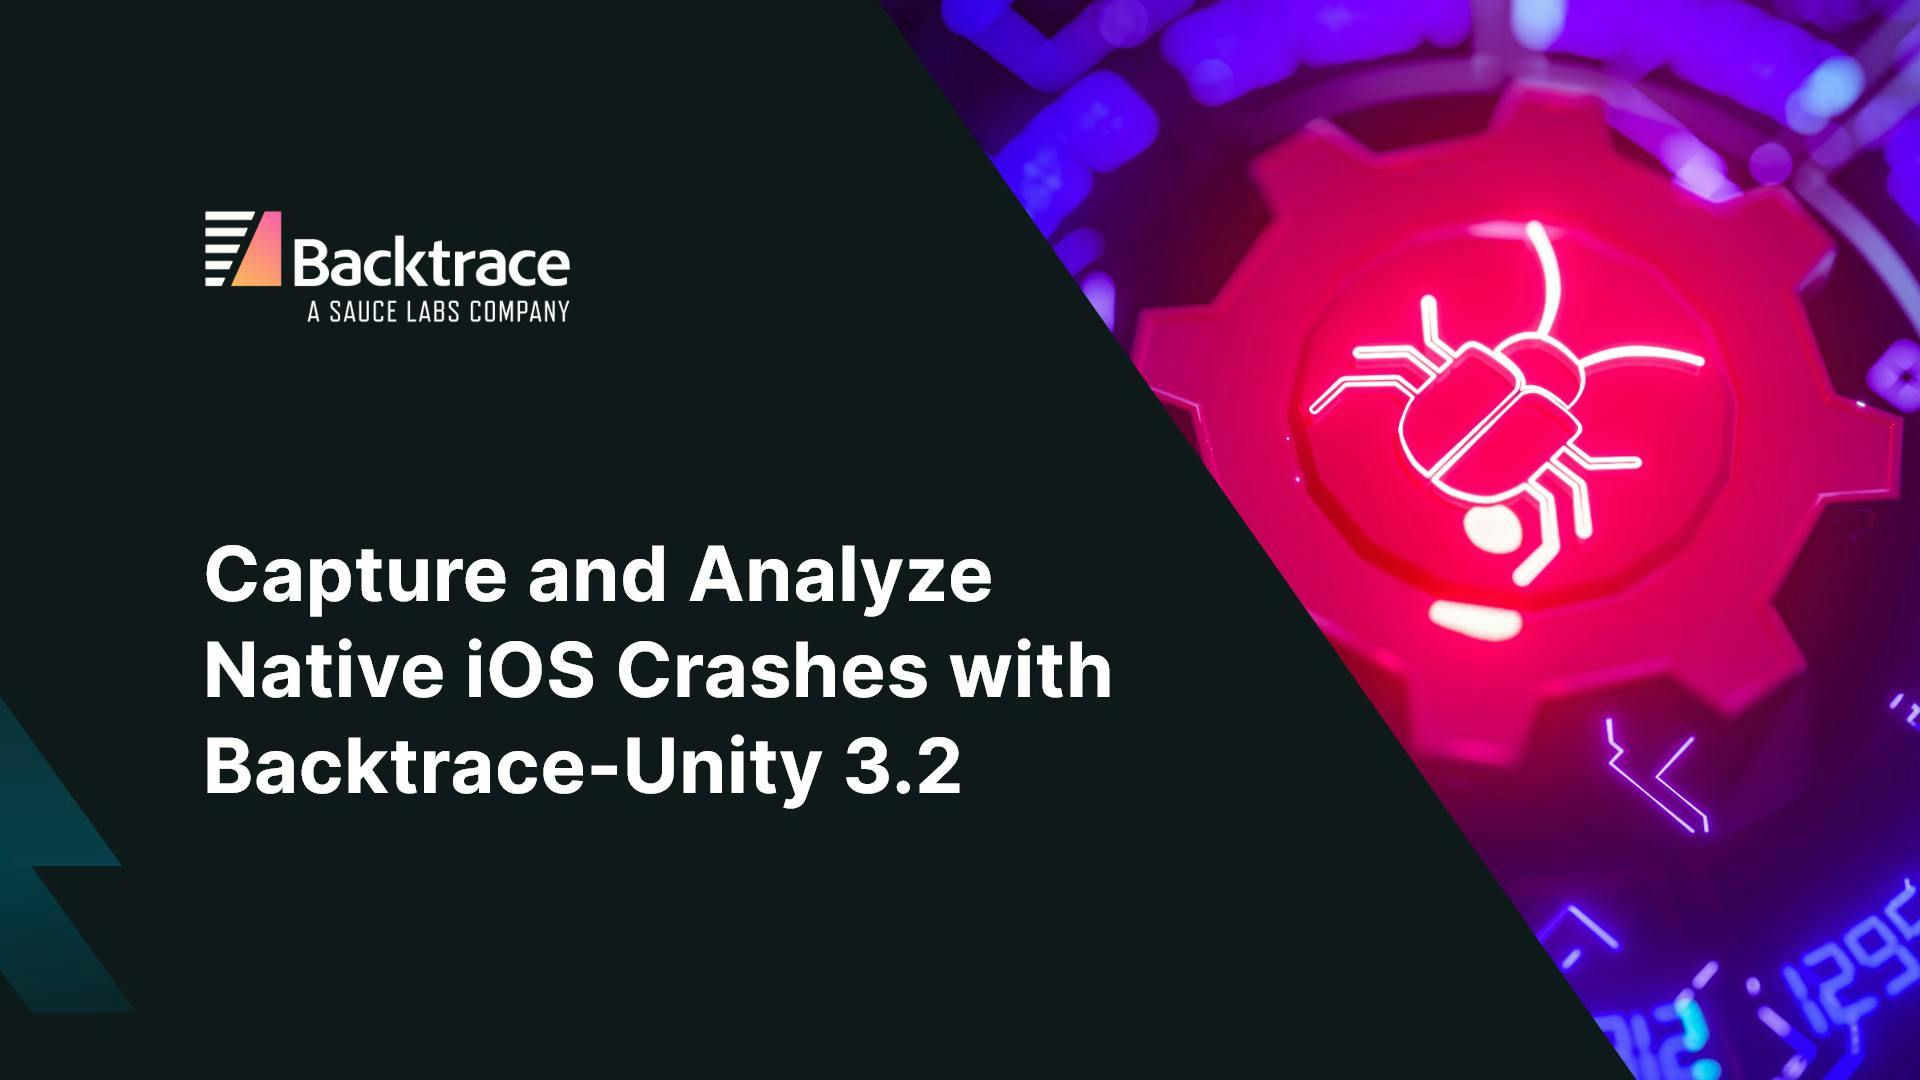 Thumbnail image for blog post: Capture And Analyze Native IOS Crashes With Backtrace-Unity 3.2